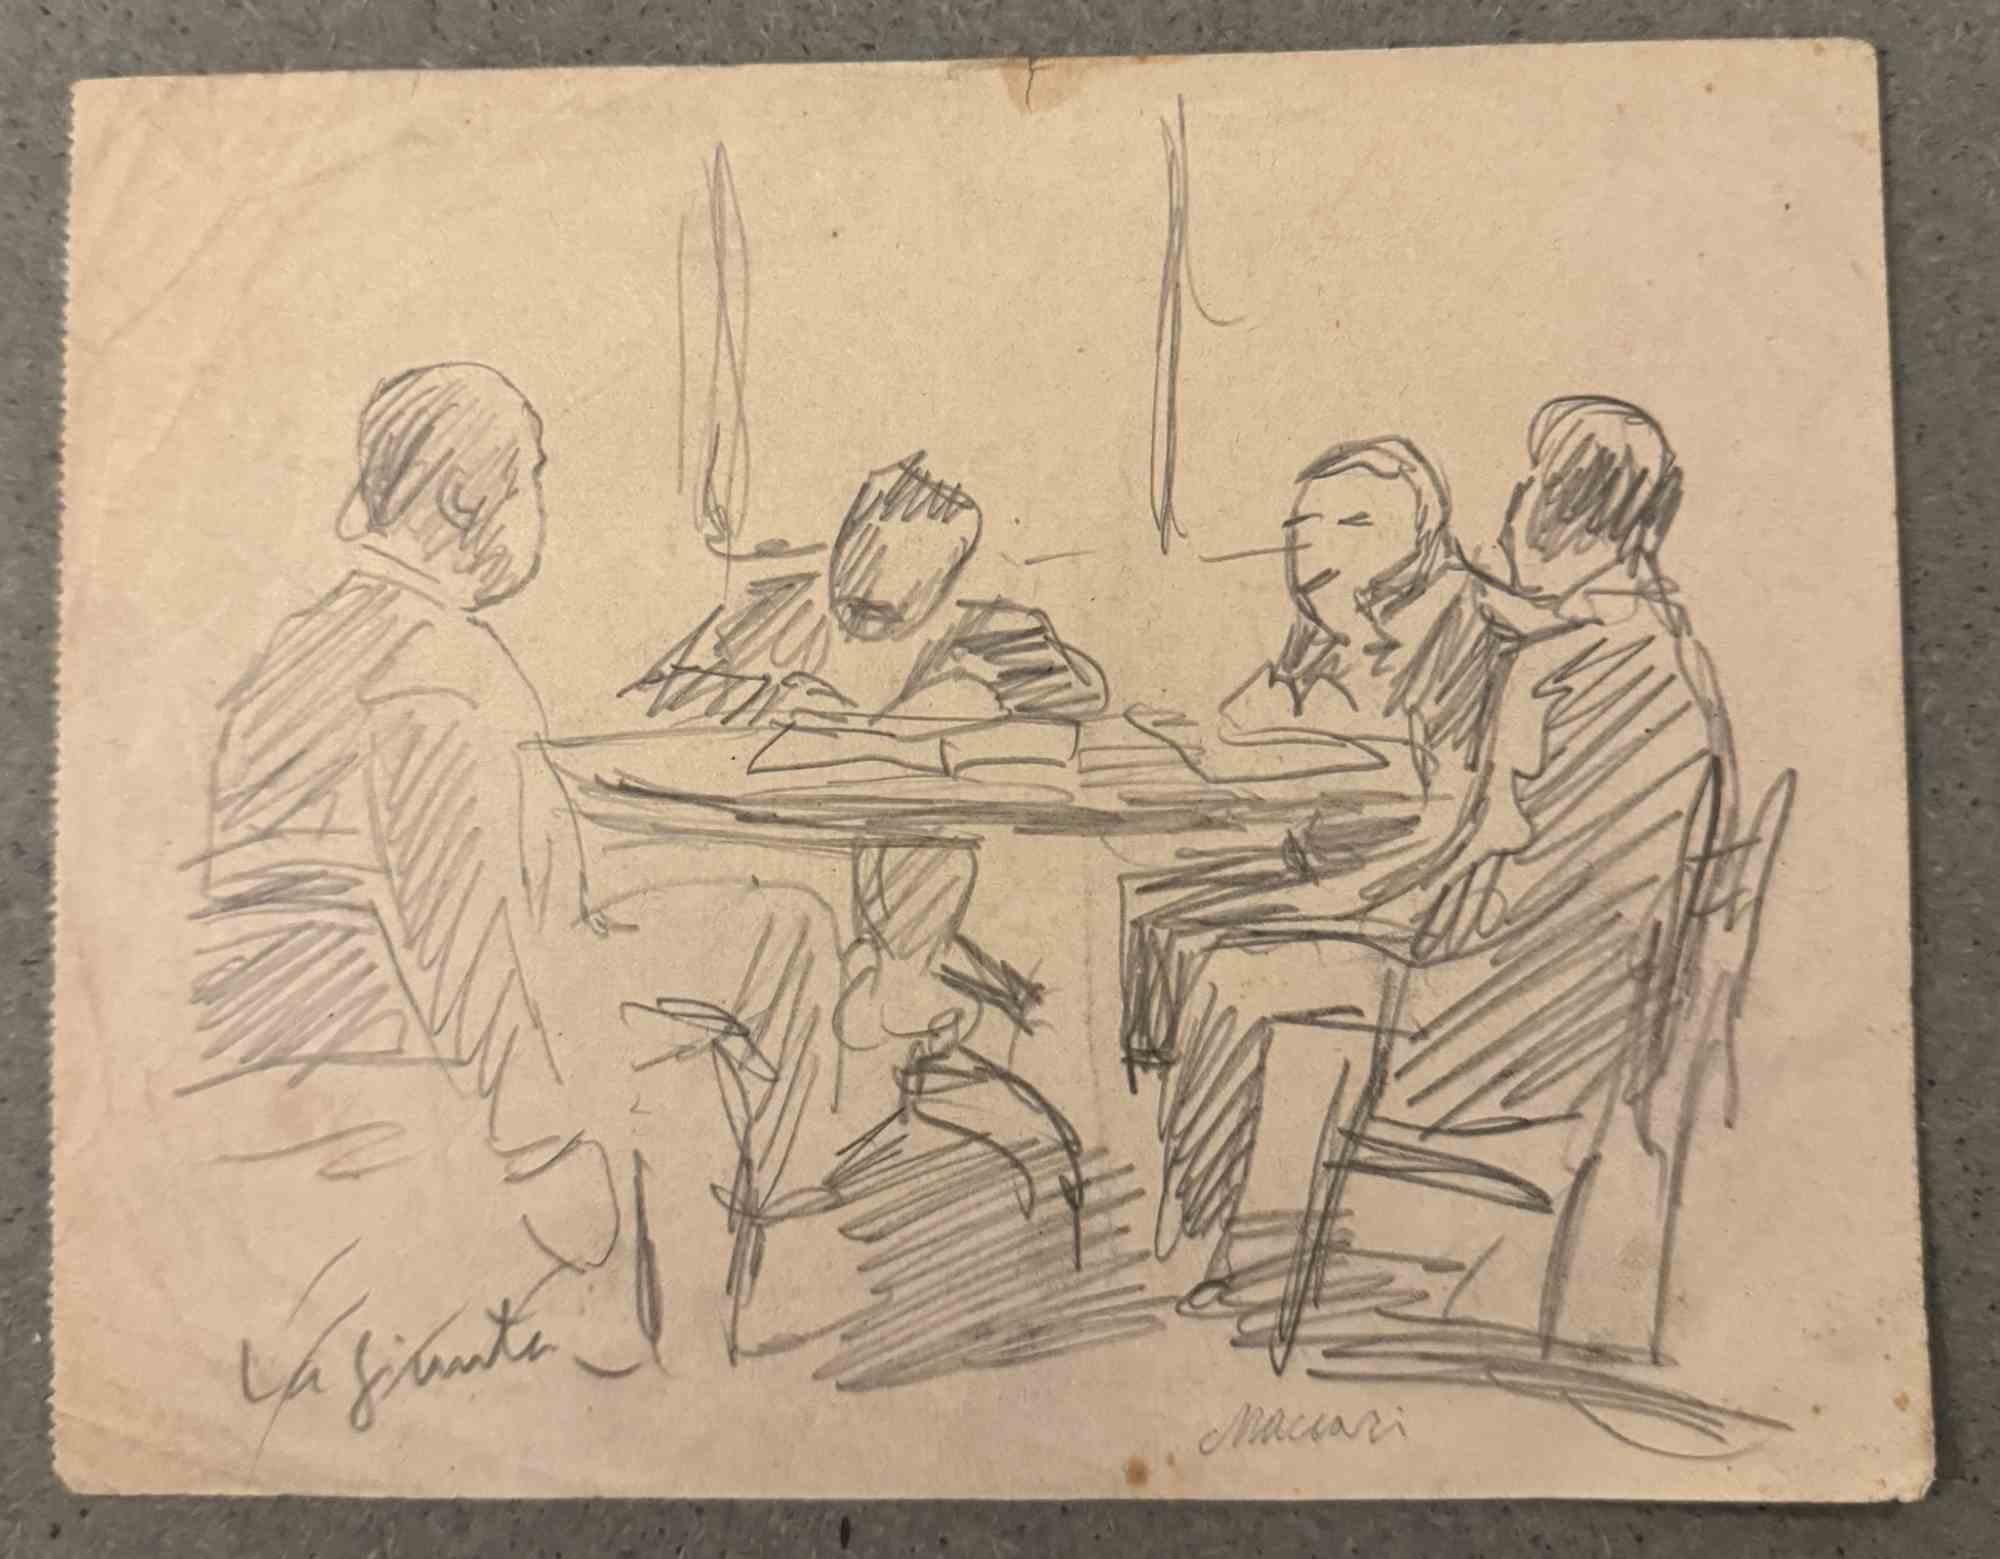 Meeting is a charcoal drawing realized by Mino Maccari  (1924-1989) in the Mid-20th Century.

Hand-signed.

Good conditions with slight foxing.

Mino Maccari (Siena, 1924-Rome, June 16, 1989) was an Italian writer, painter, engraver and journalist,